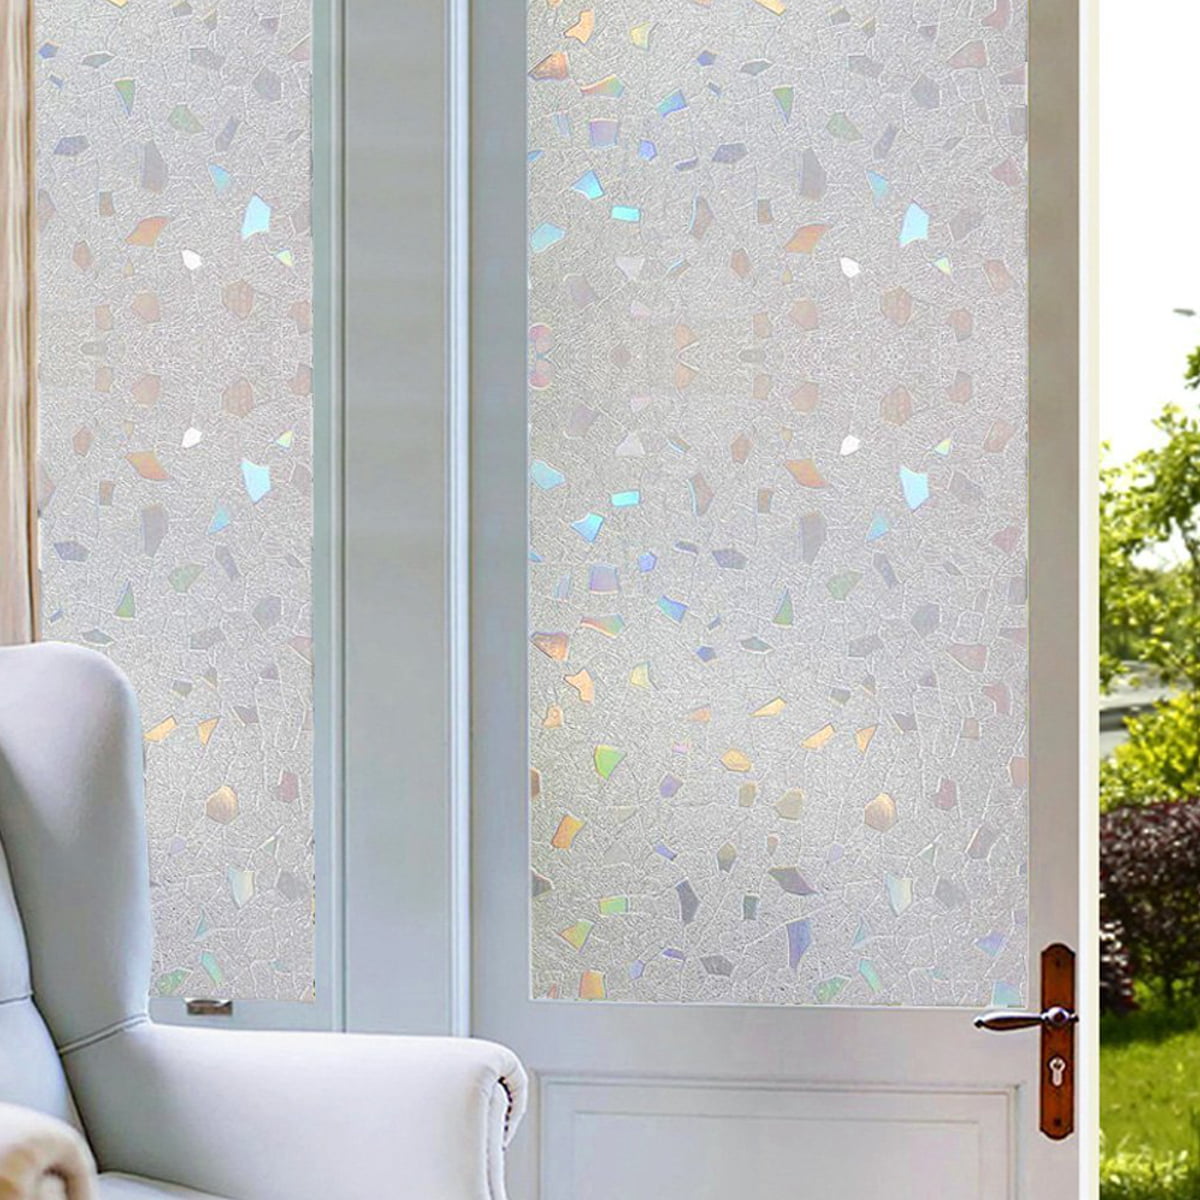 3D Static Cling Cover Frosted Window Glass Film Sticker Privacy Decor #mil gxi_ 